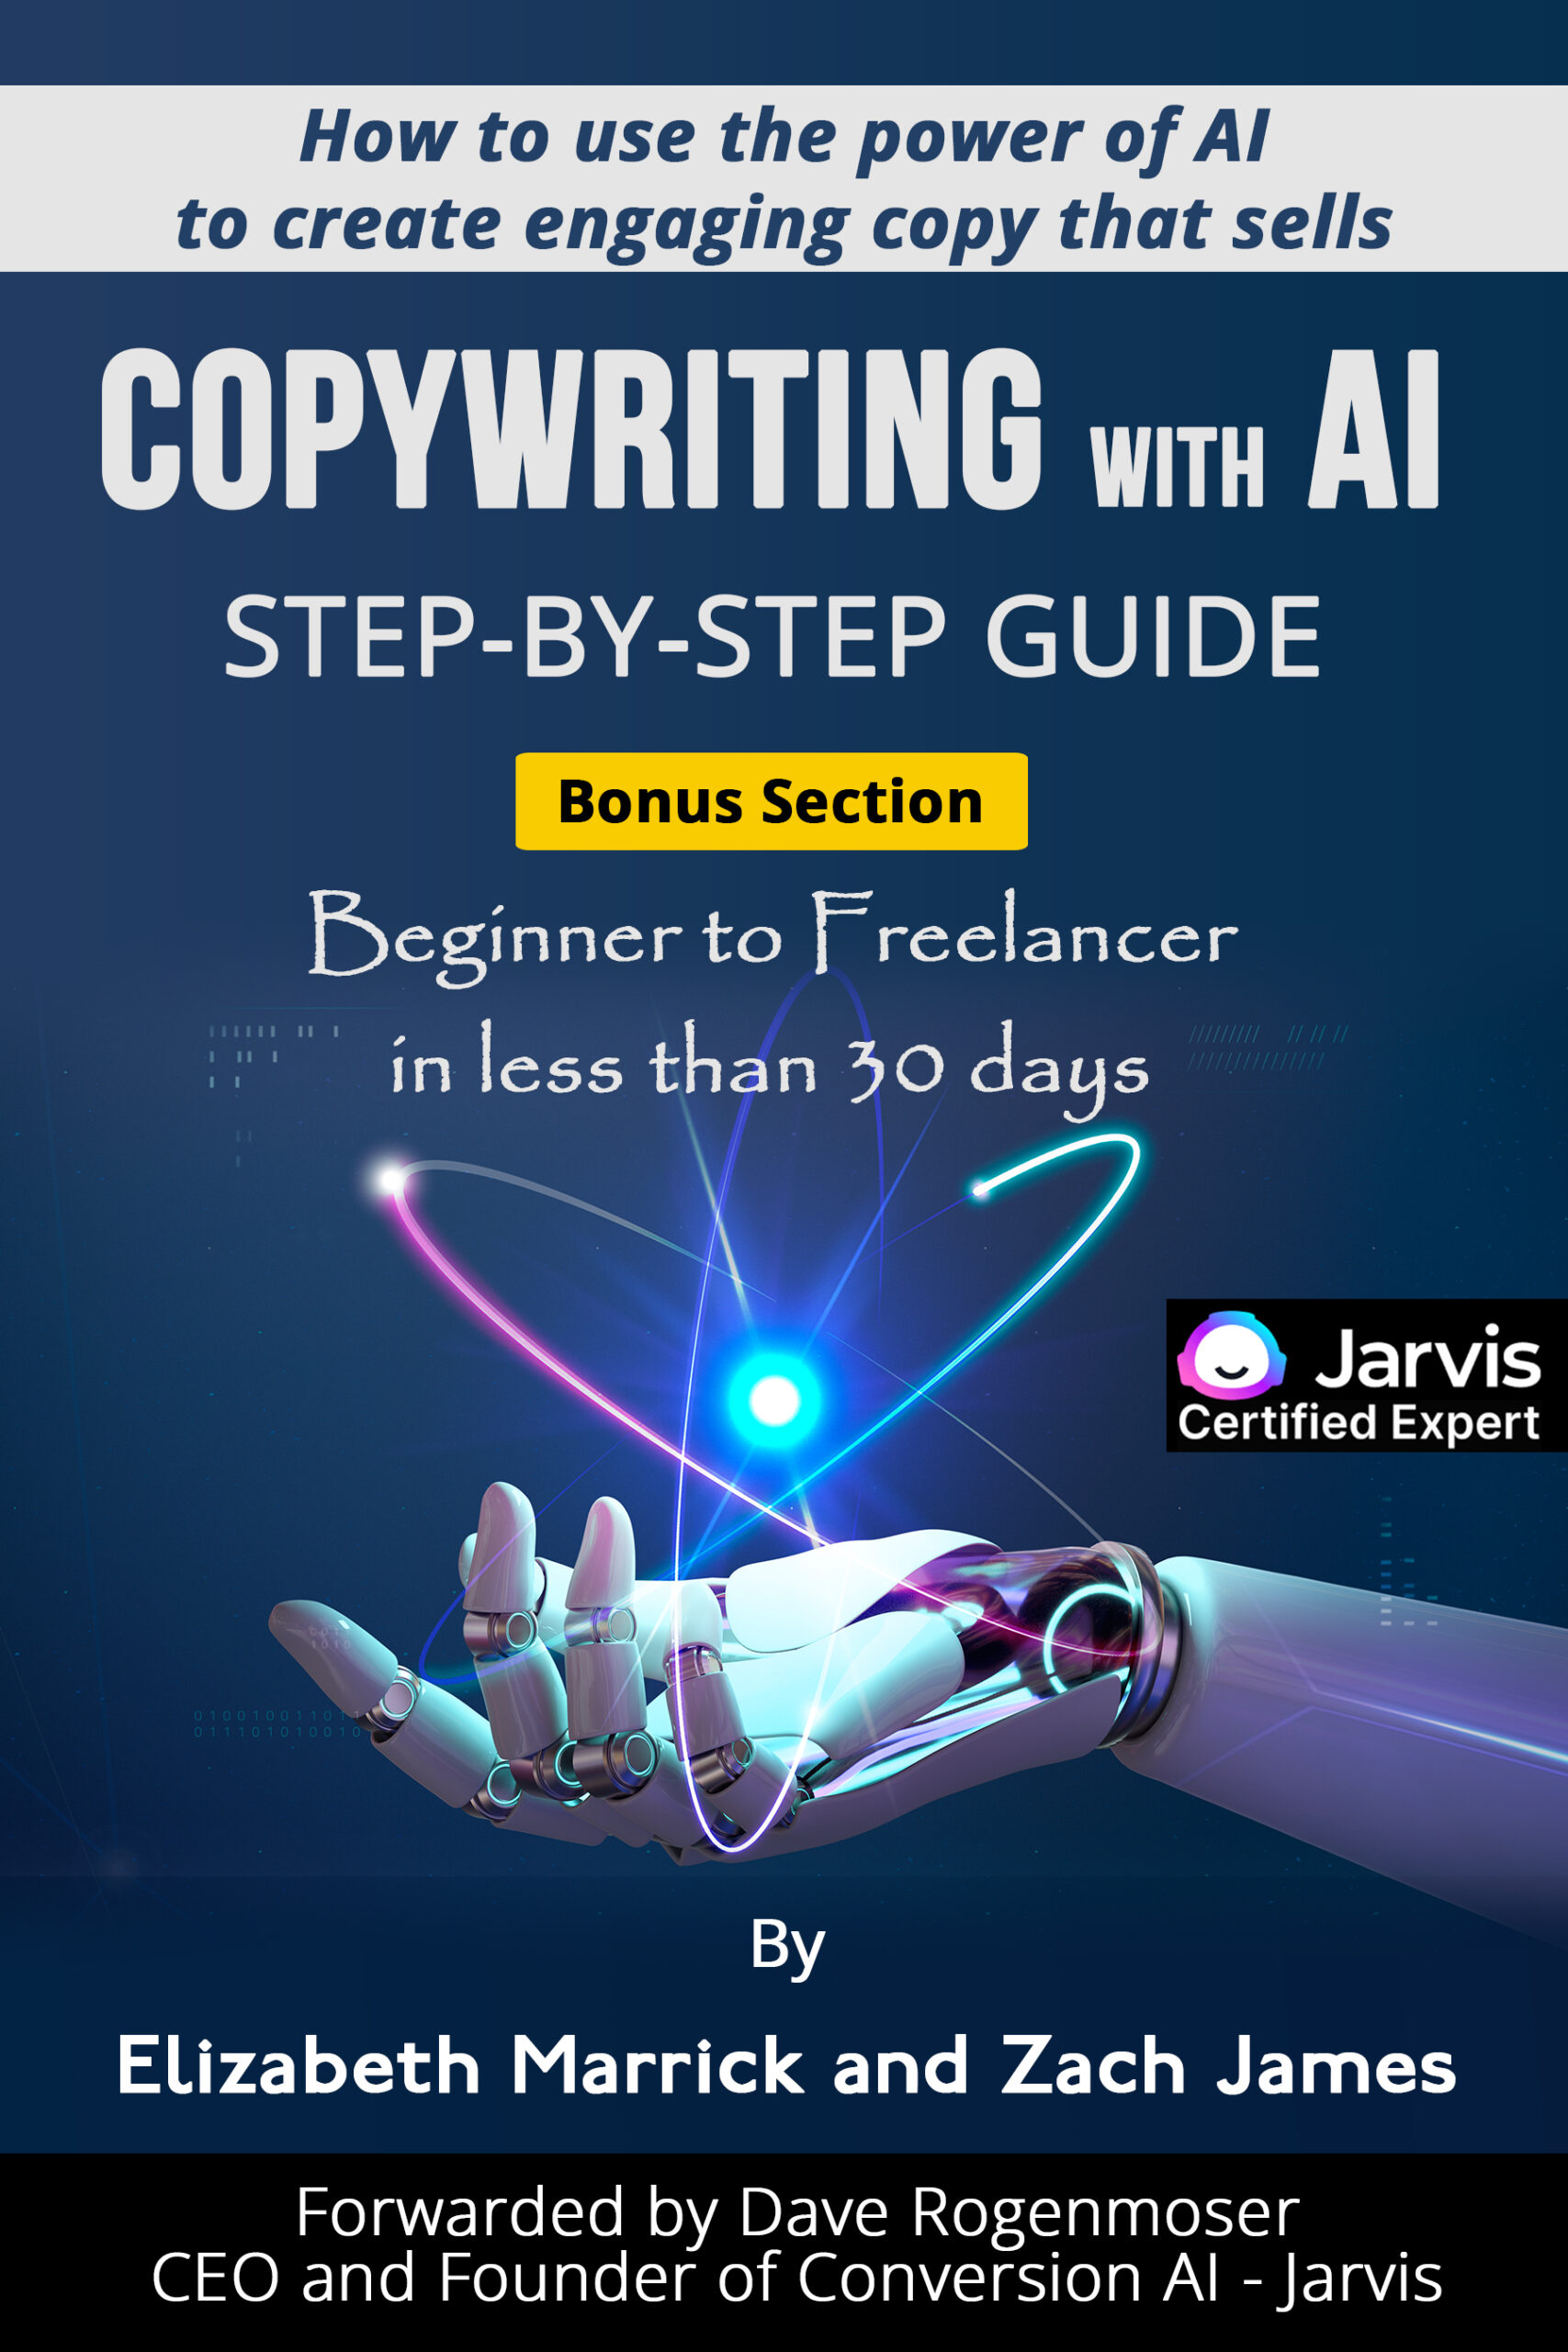 FREE: Copywriting with AI Step-By-Step Guide: How to use the power of AI to create engaging copy that sells by Elizabeth Marrick and Zach James